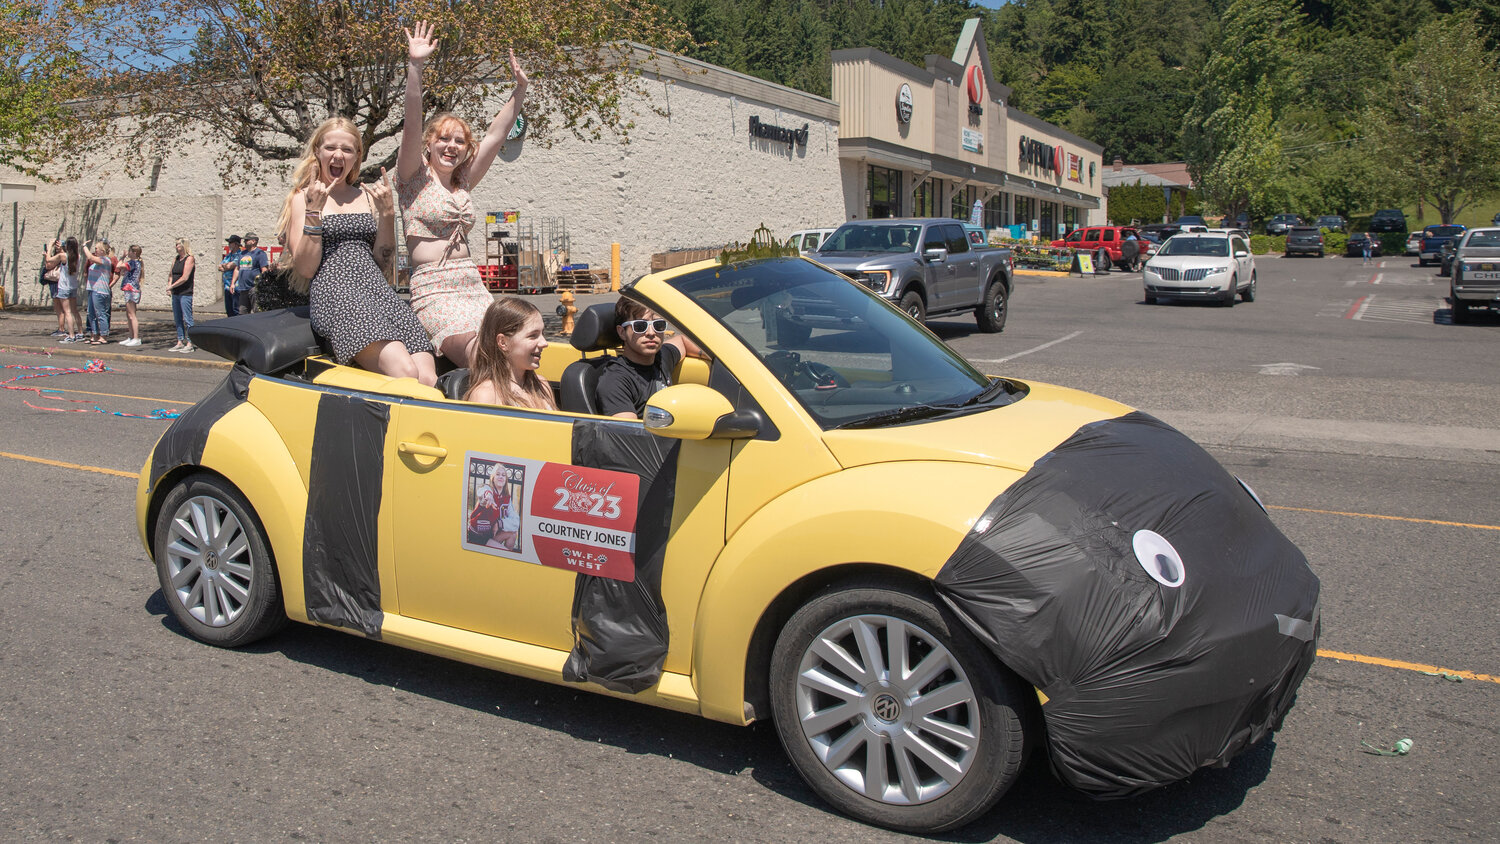 Courtney Jones and classmates smile and cheer during a parade honoring future graduates of W.F. West High School in Chehalis on Sunday, June 4.